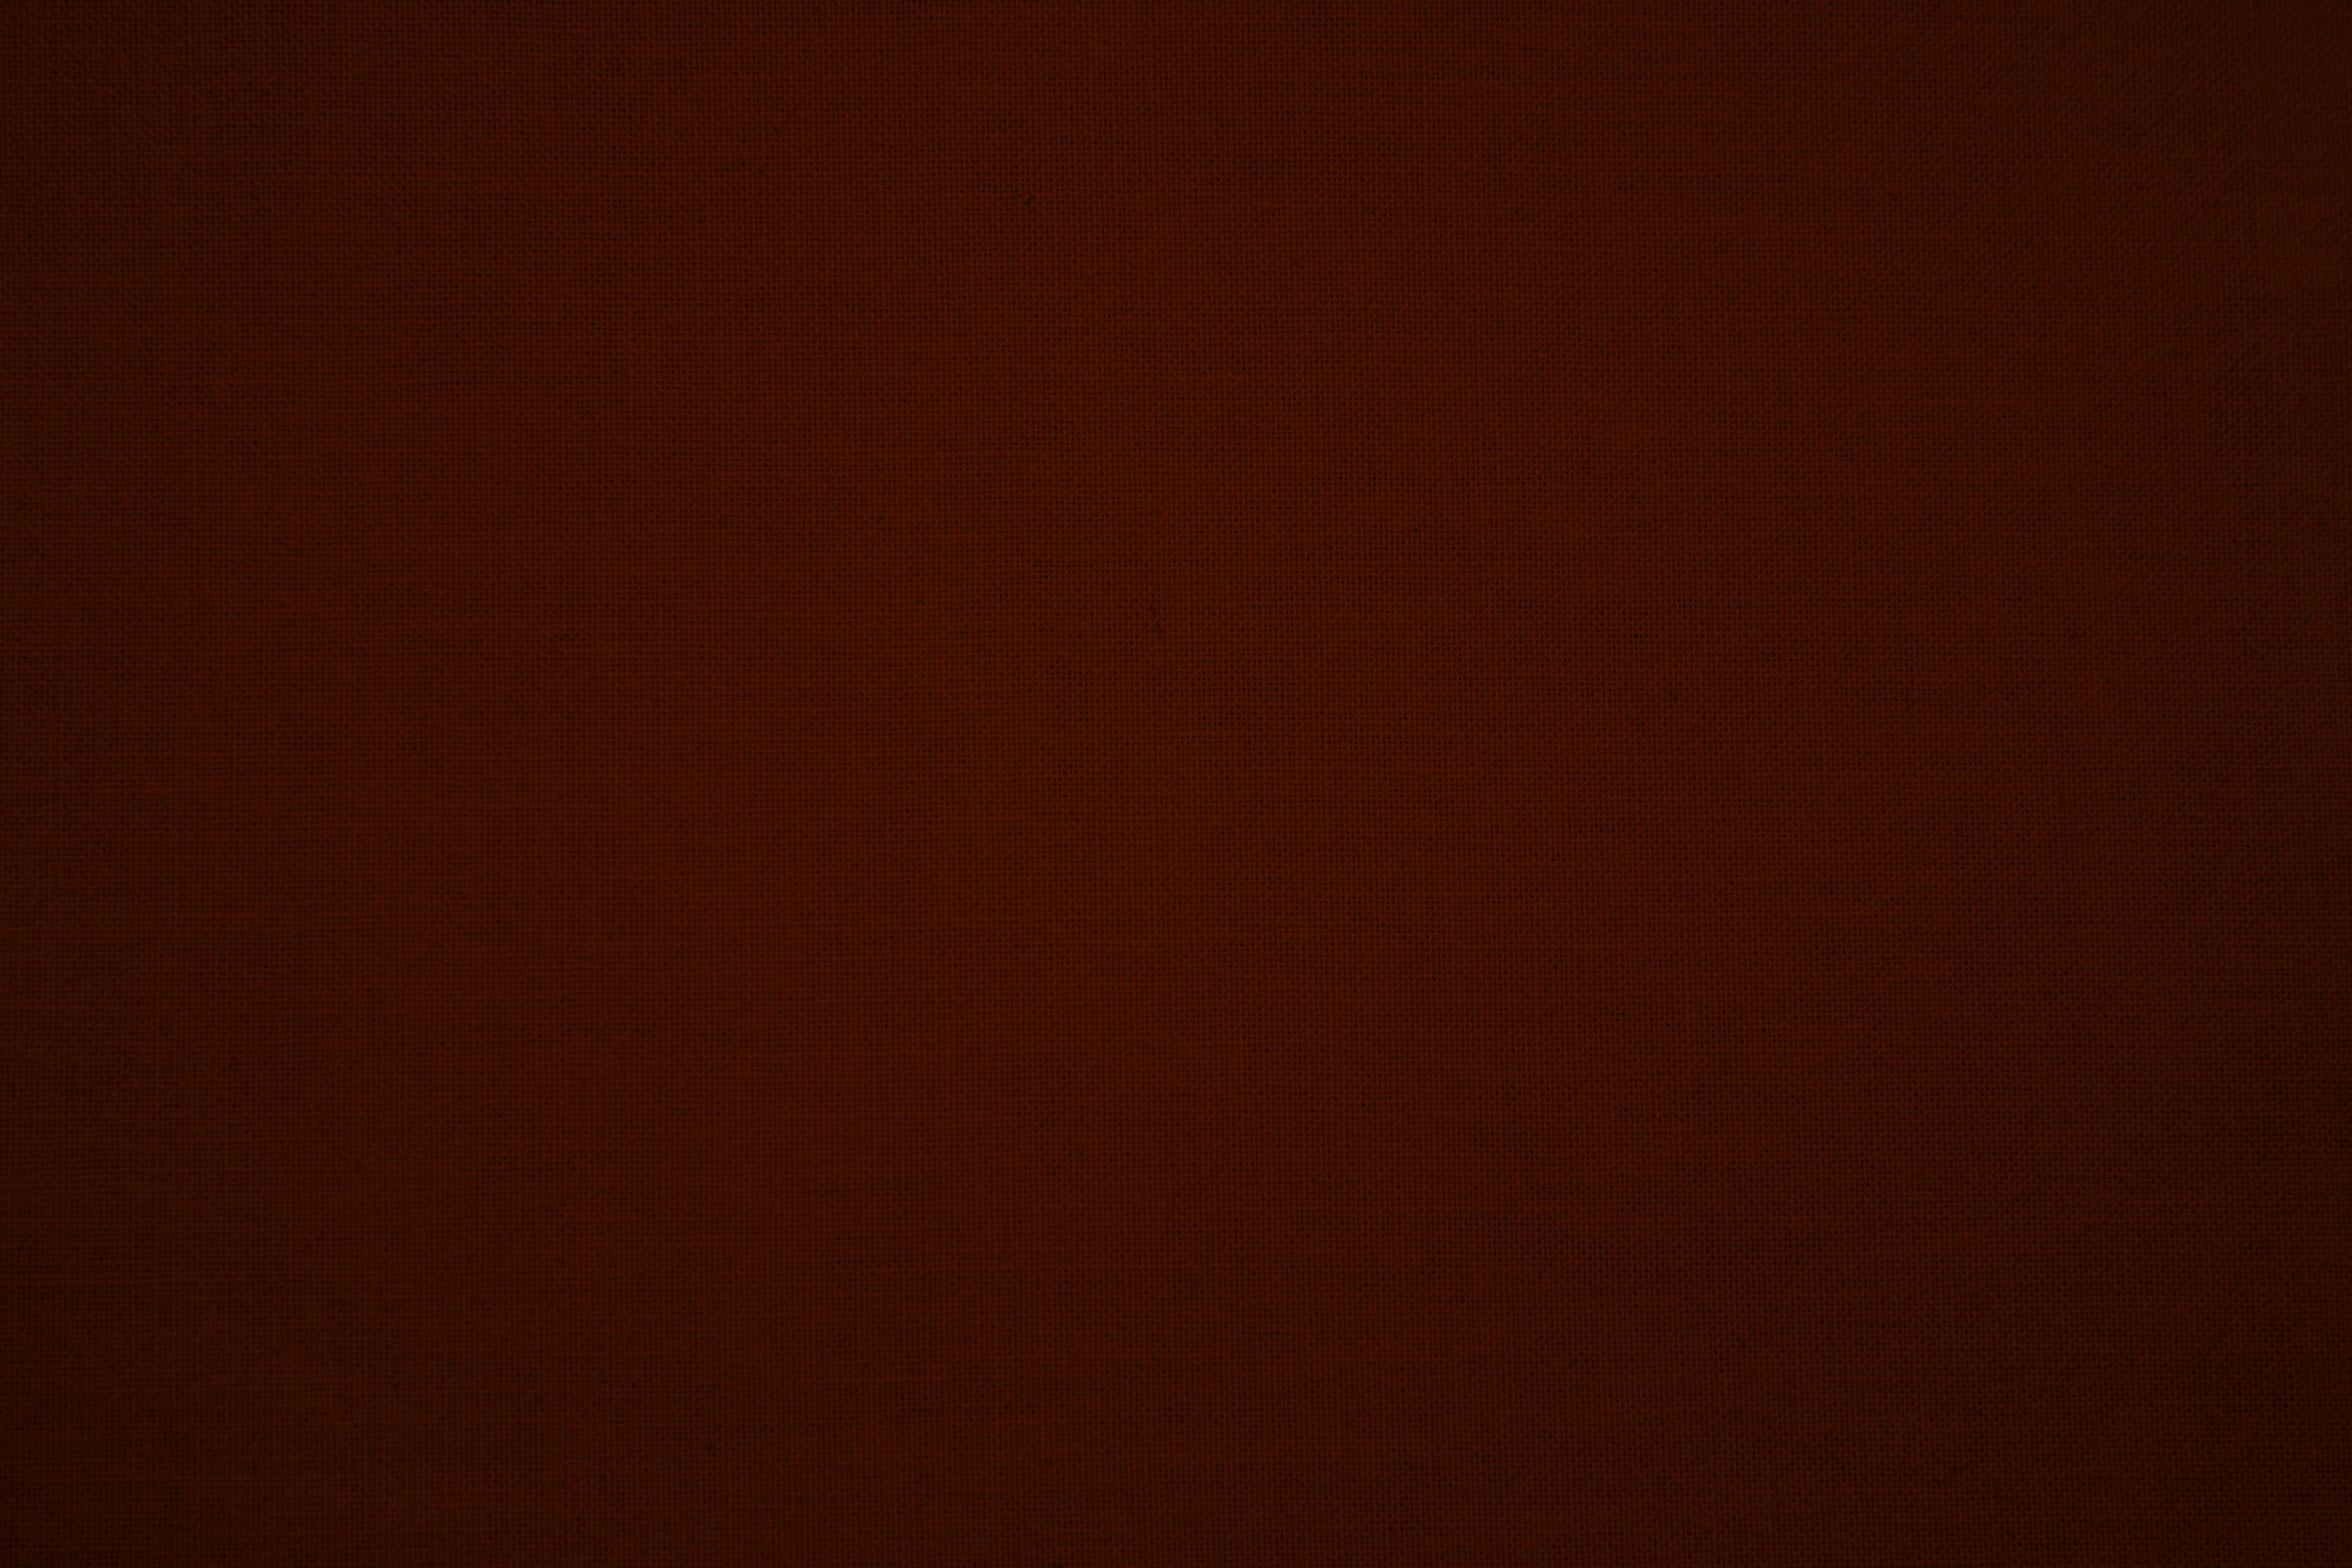 Dark Red S Fabric Texture Picture Photograph Photos